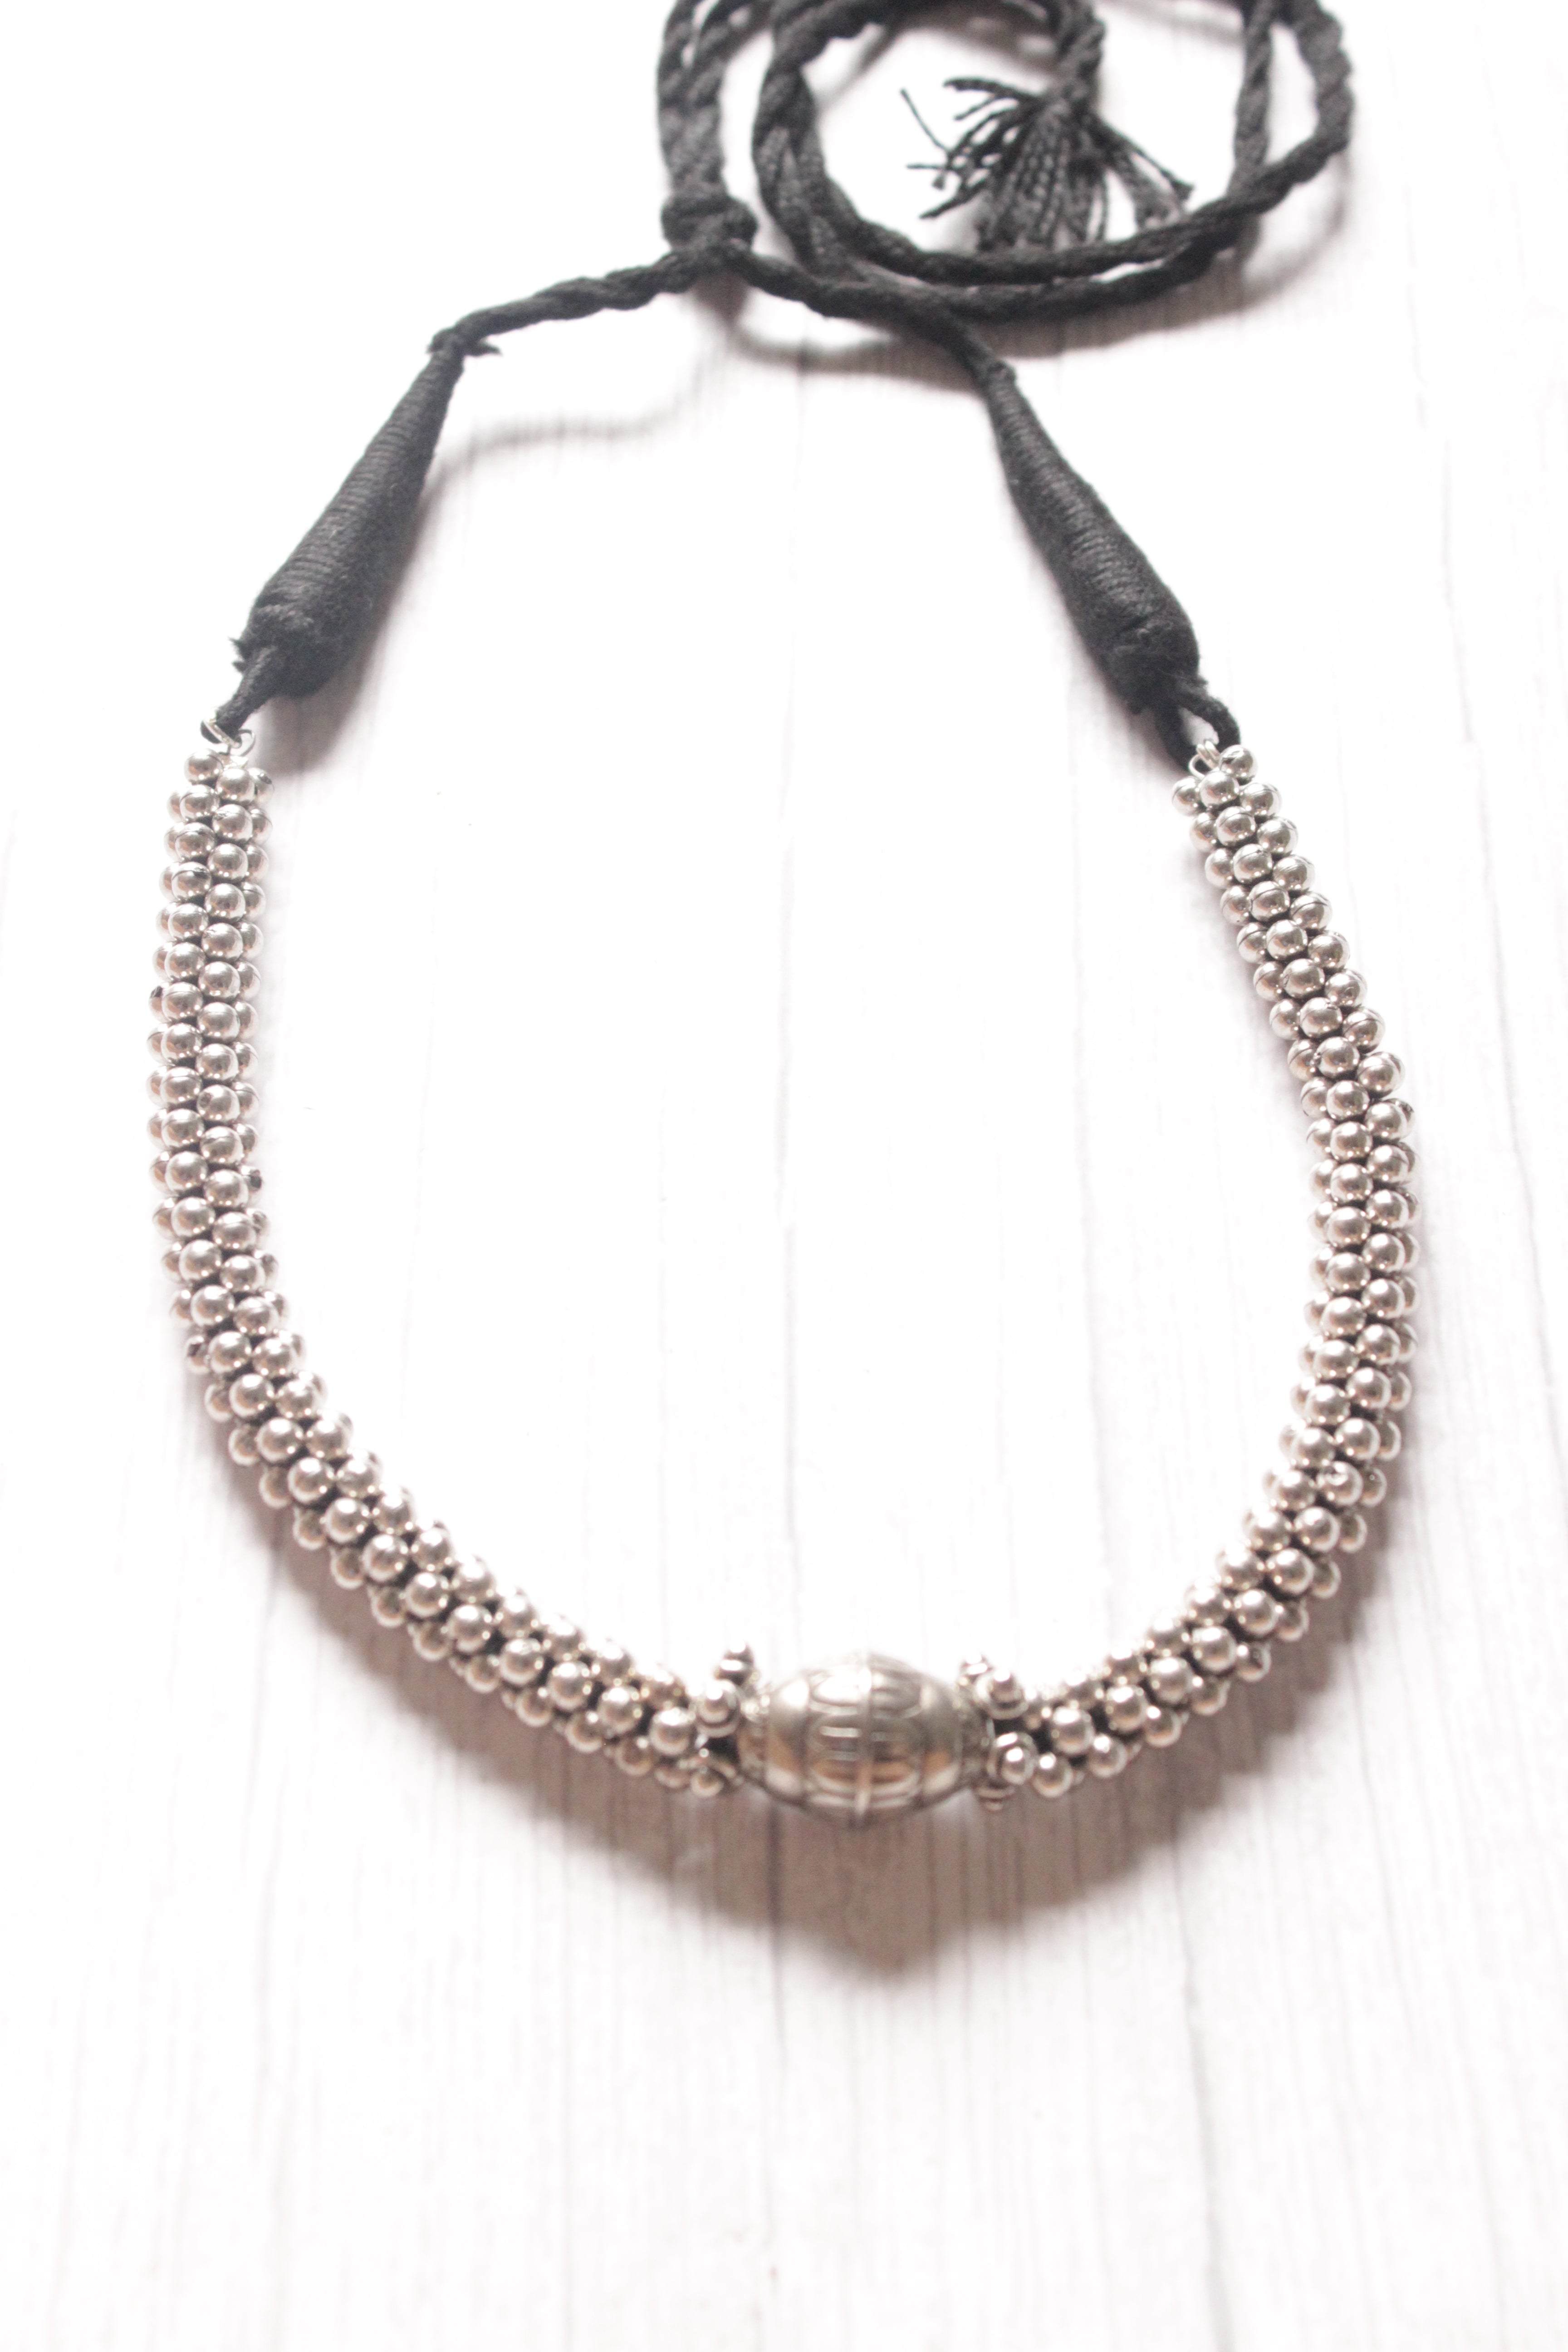 Metal Beads Silver Finish Adjustable Thread Closure Choker Necklace